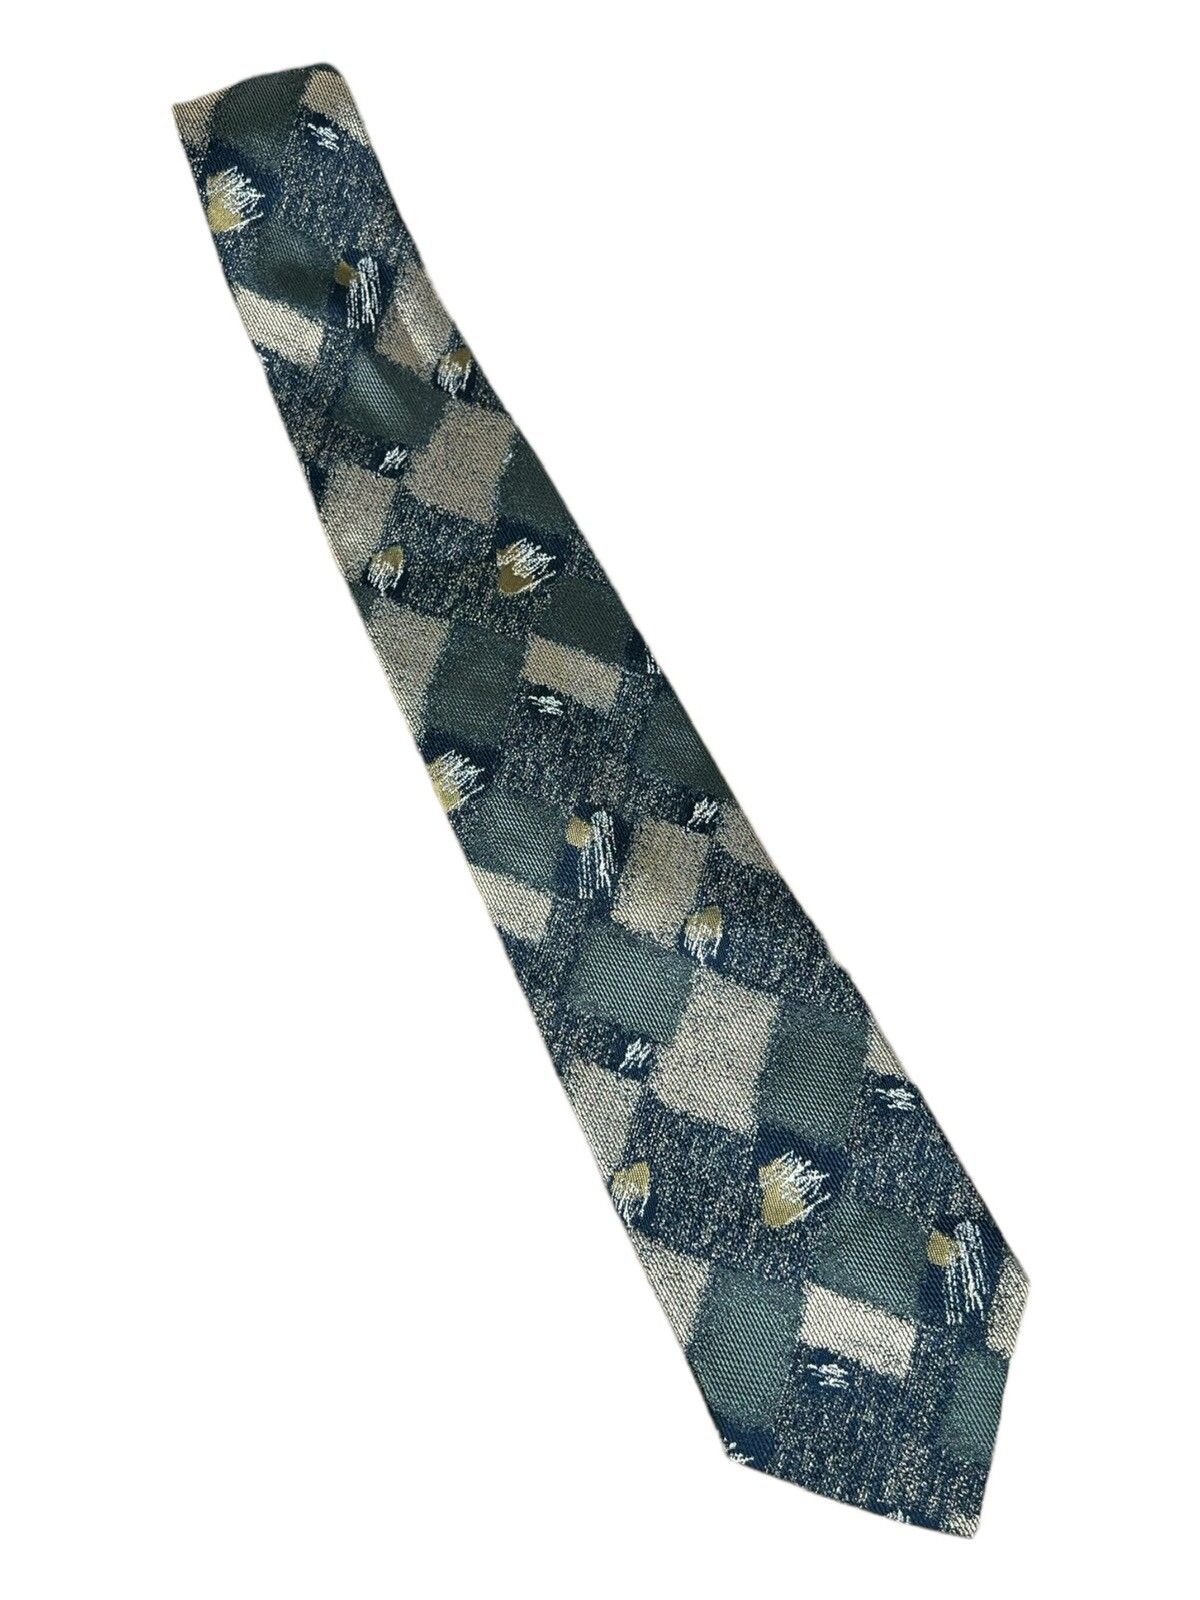 Issey Miyake Scratch Patch Print Issey Miyake Silk Neck Tie Size ONE SIZE - 1 Preview